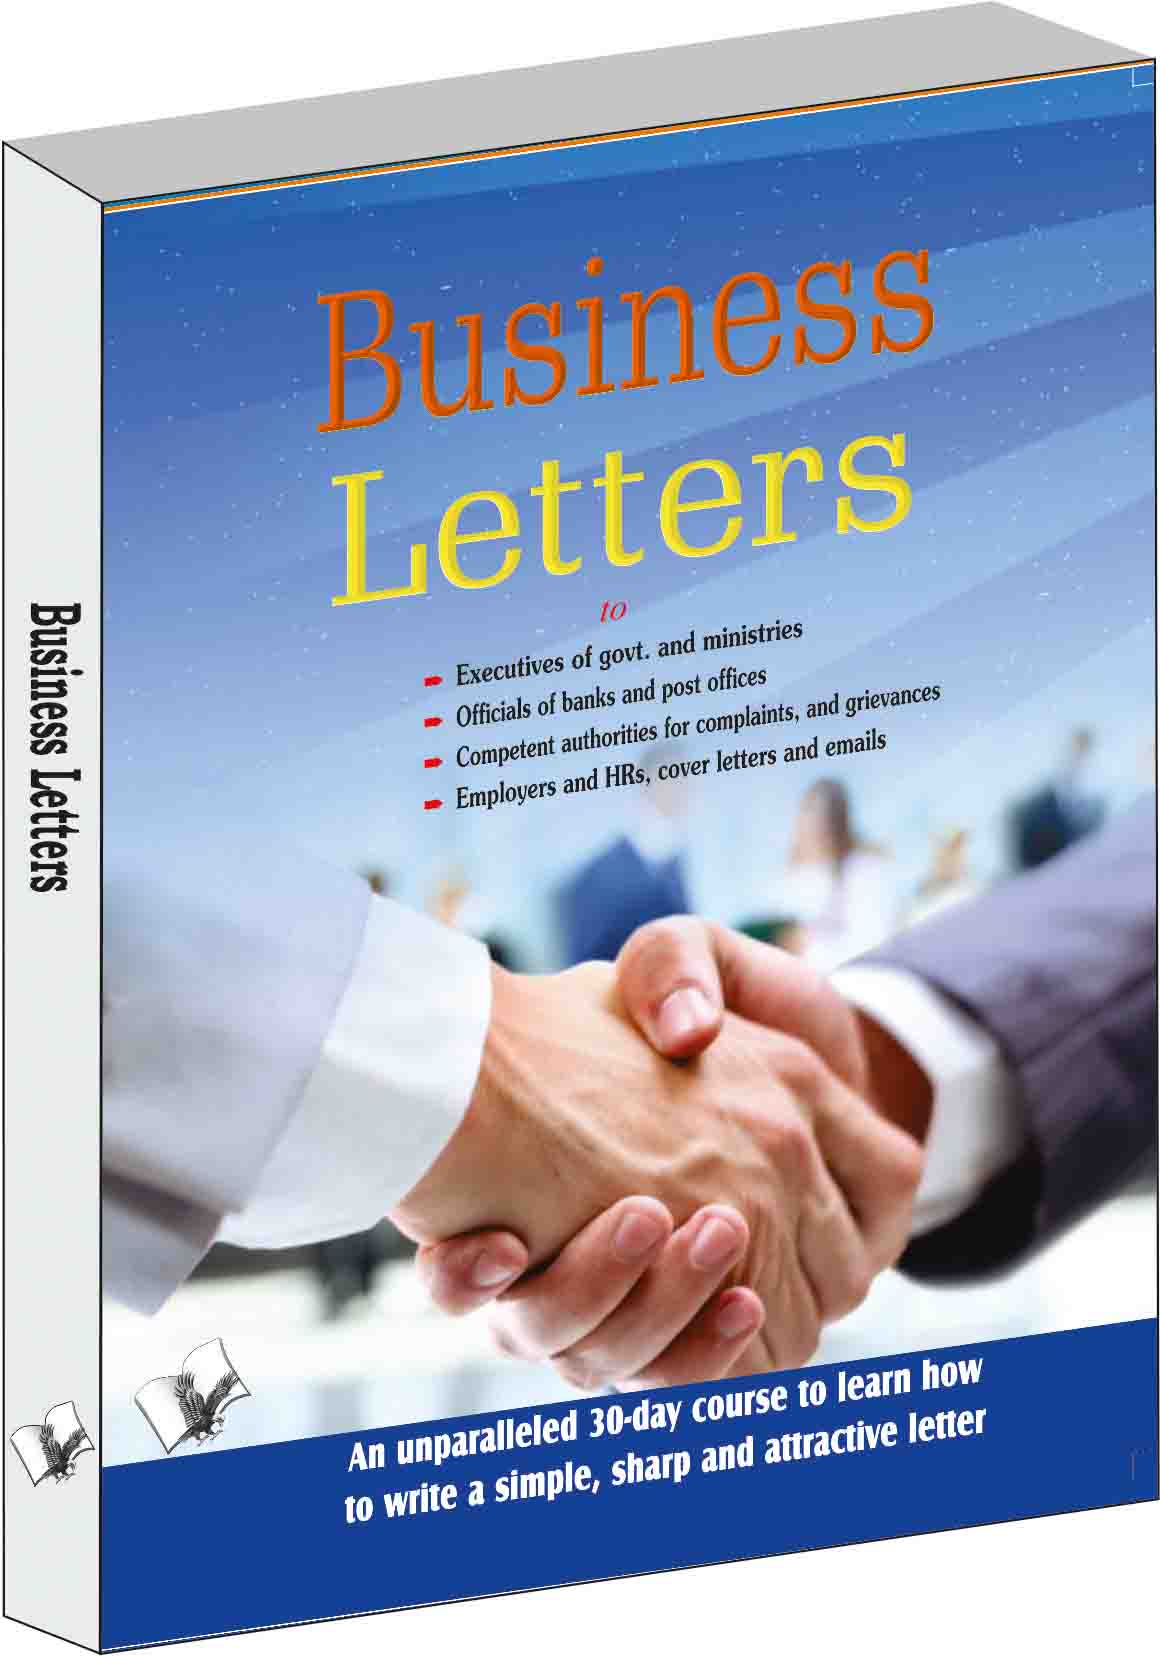 Business Letters -An unparalleled 30-day course to learn how 
to write a simple, sharp and attractive letter 